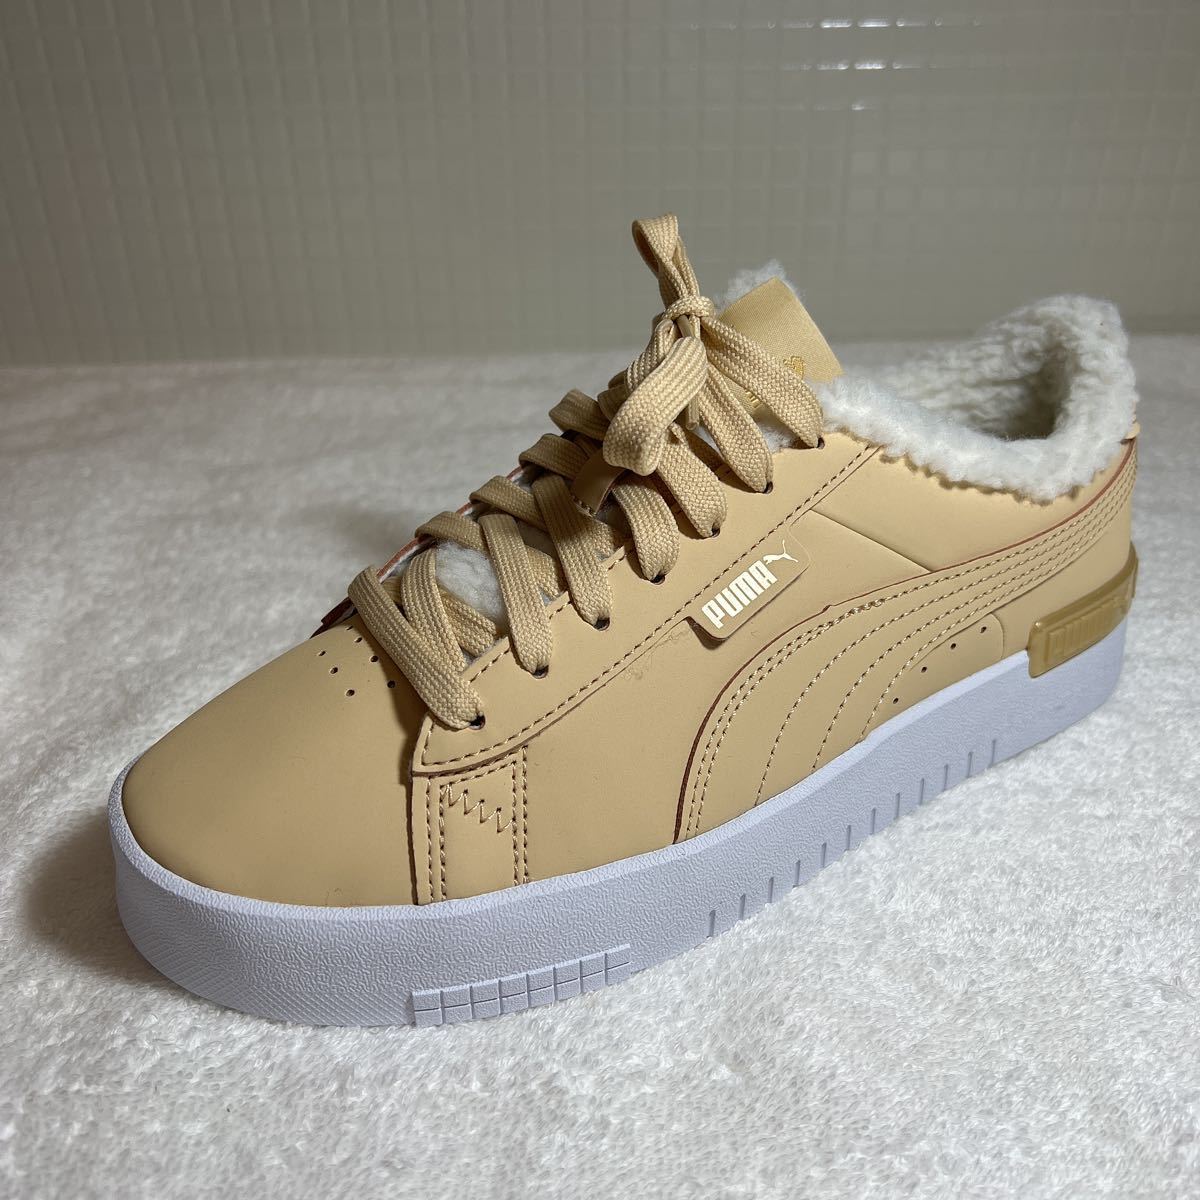 *PUMA Jada Teddy WS { product number 382703 02}SOFTFORM+ inside boa lining low cut shoes [ beige group ]23.5cm correspondence size ( absolute size 24.5cm)B*